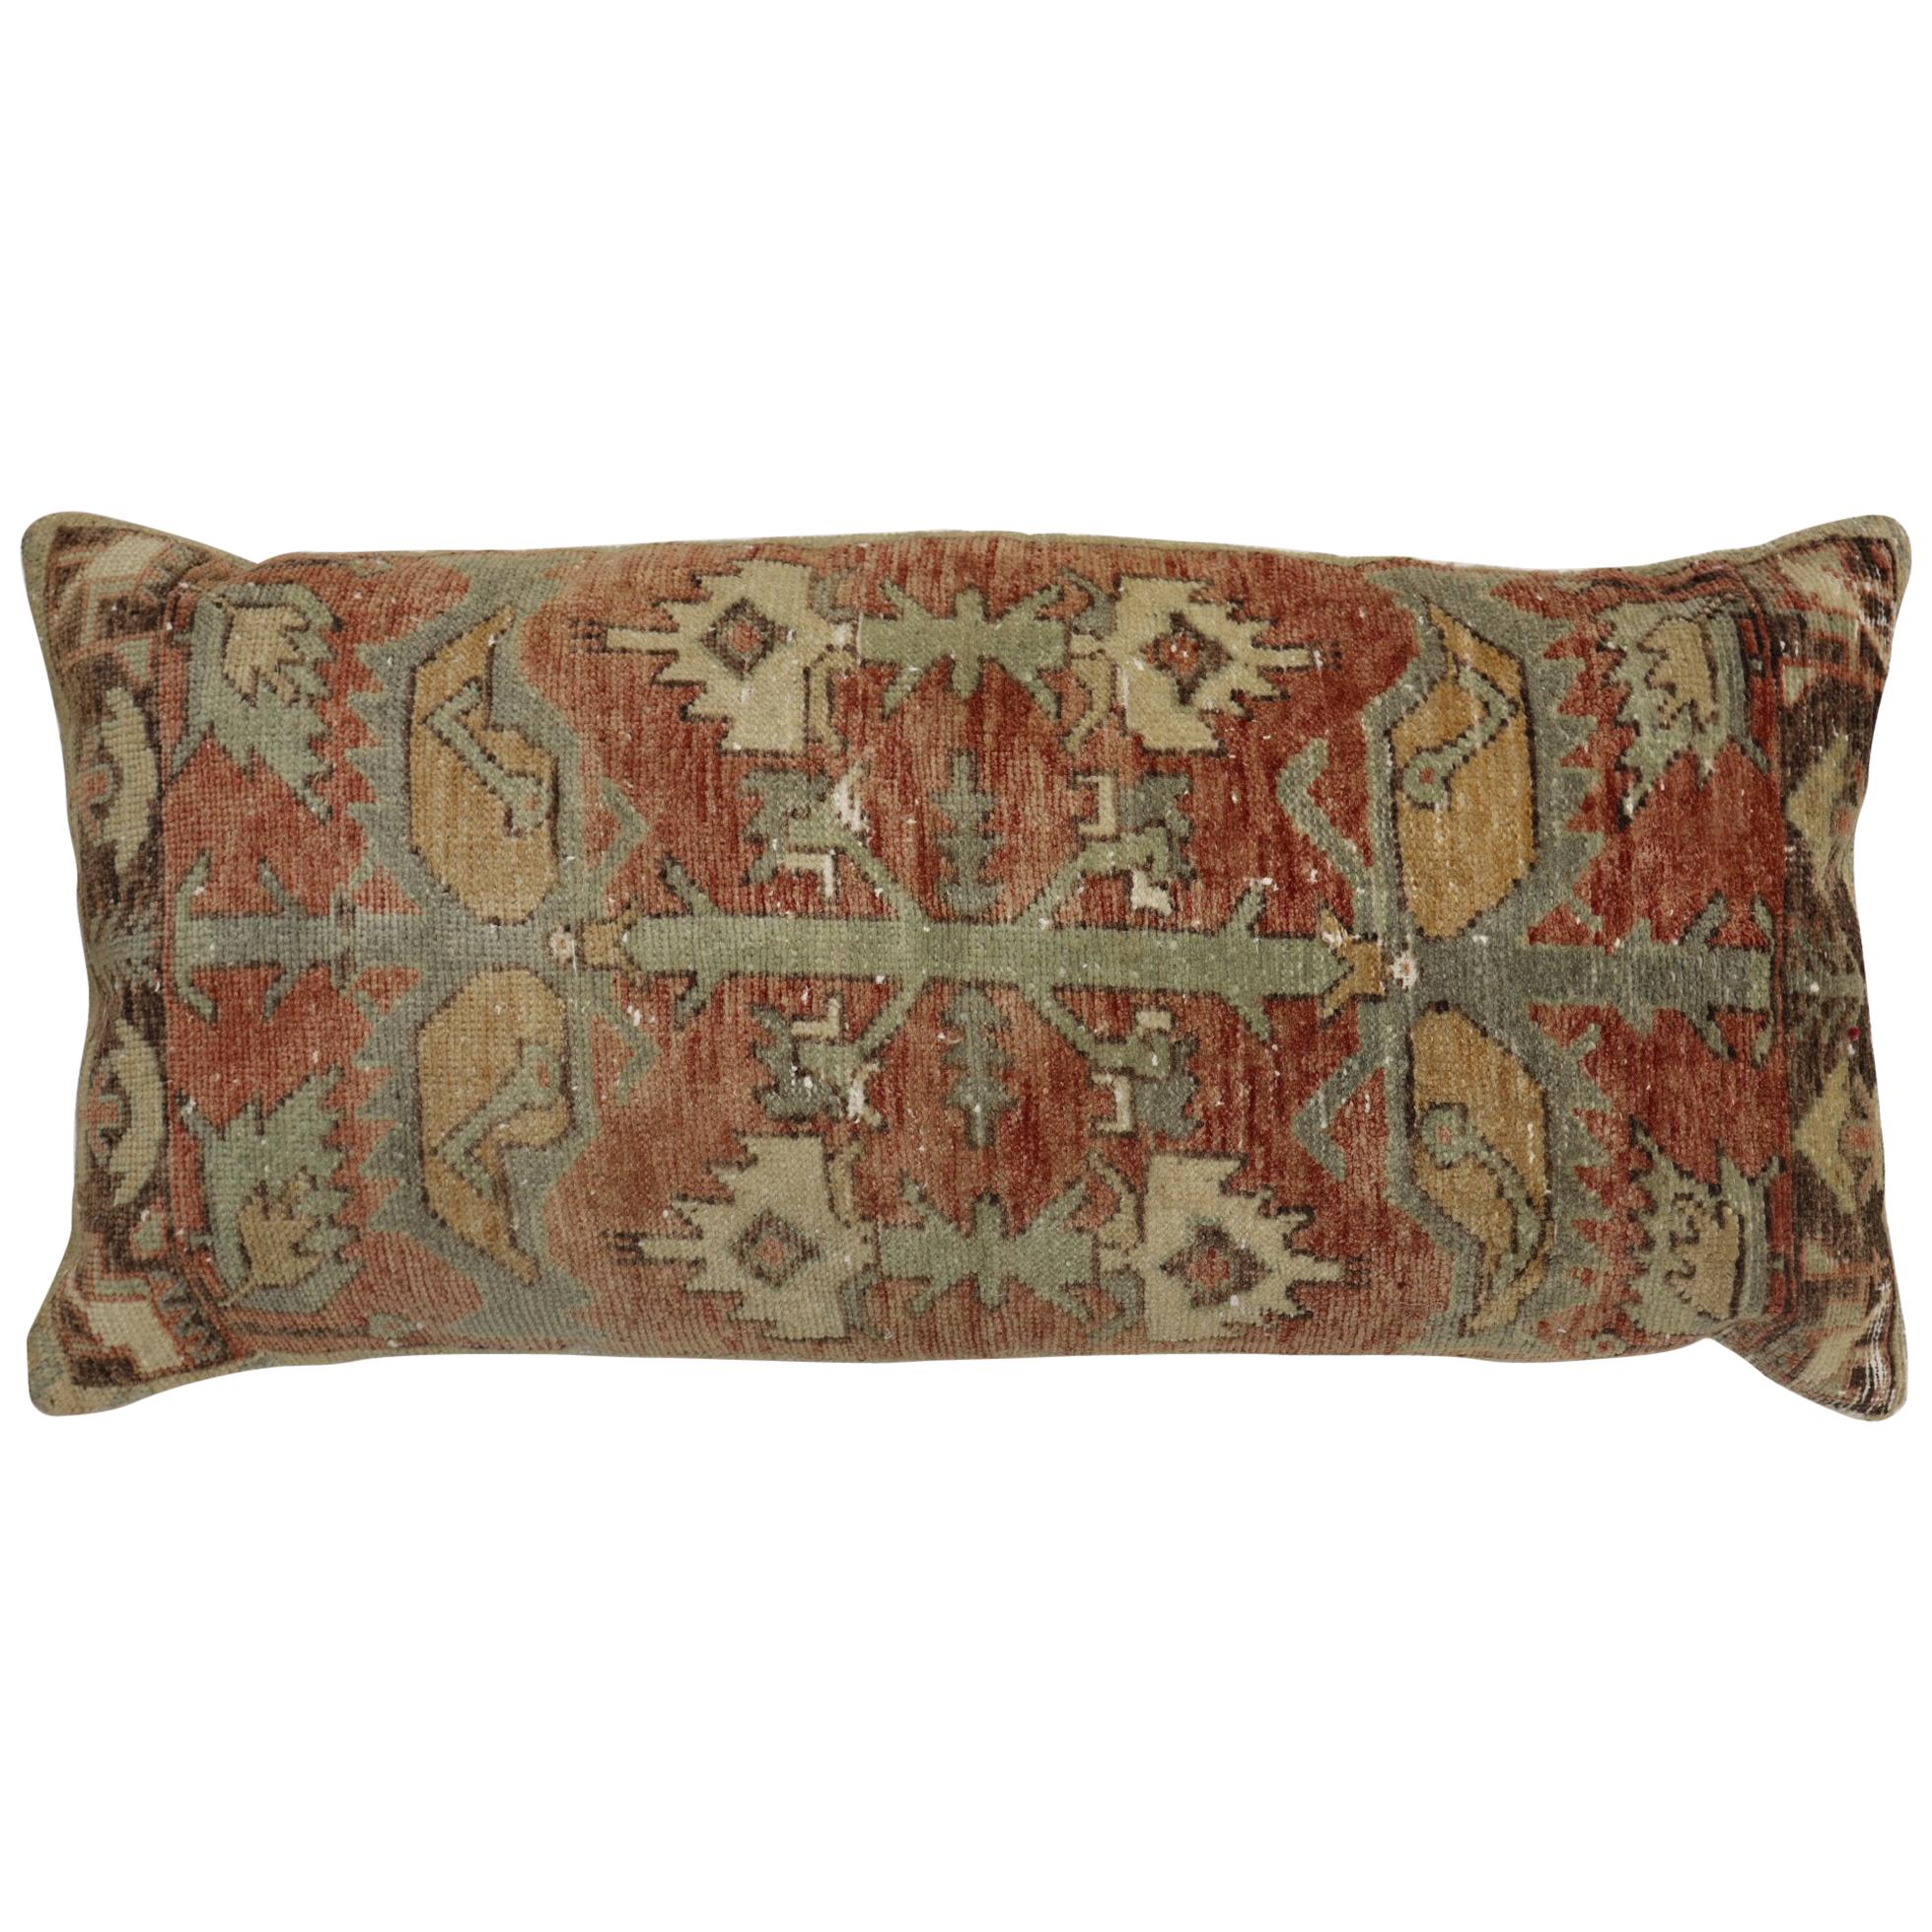 Large Turkish Floor Size Rustic Geometric Pillow For Sale